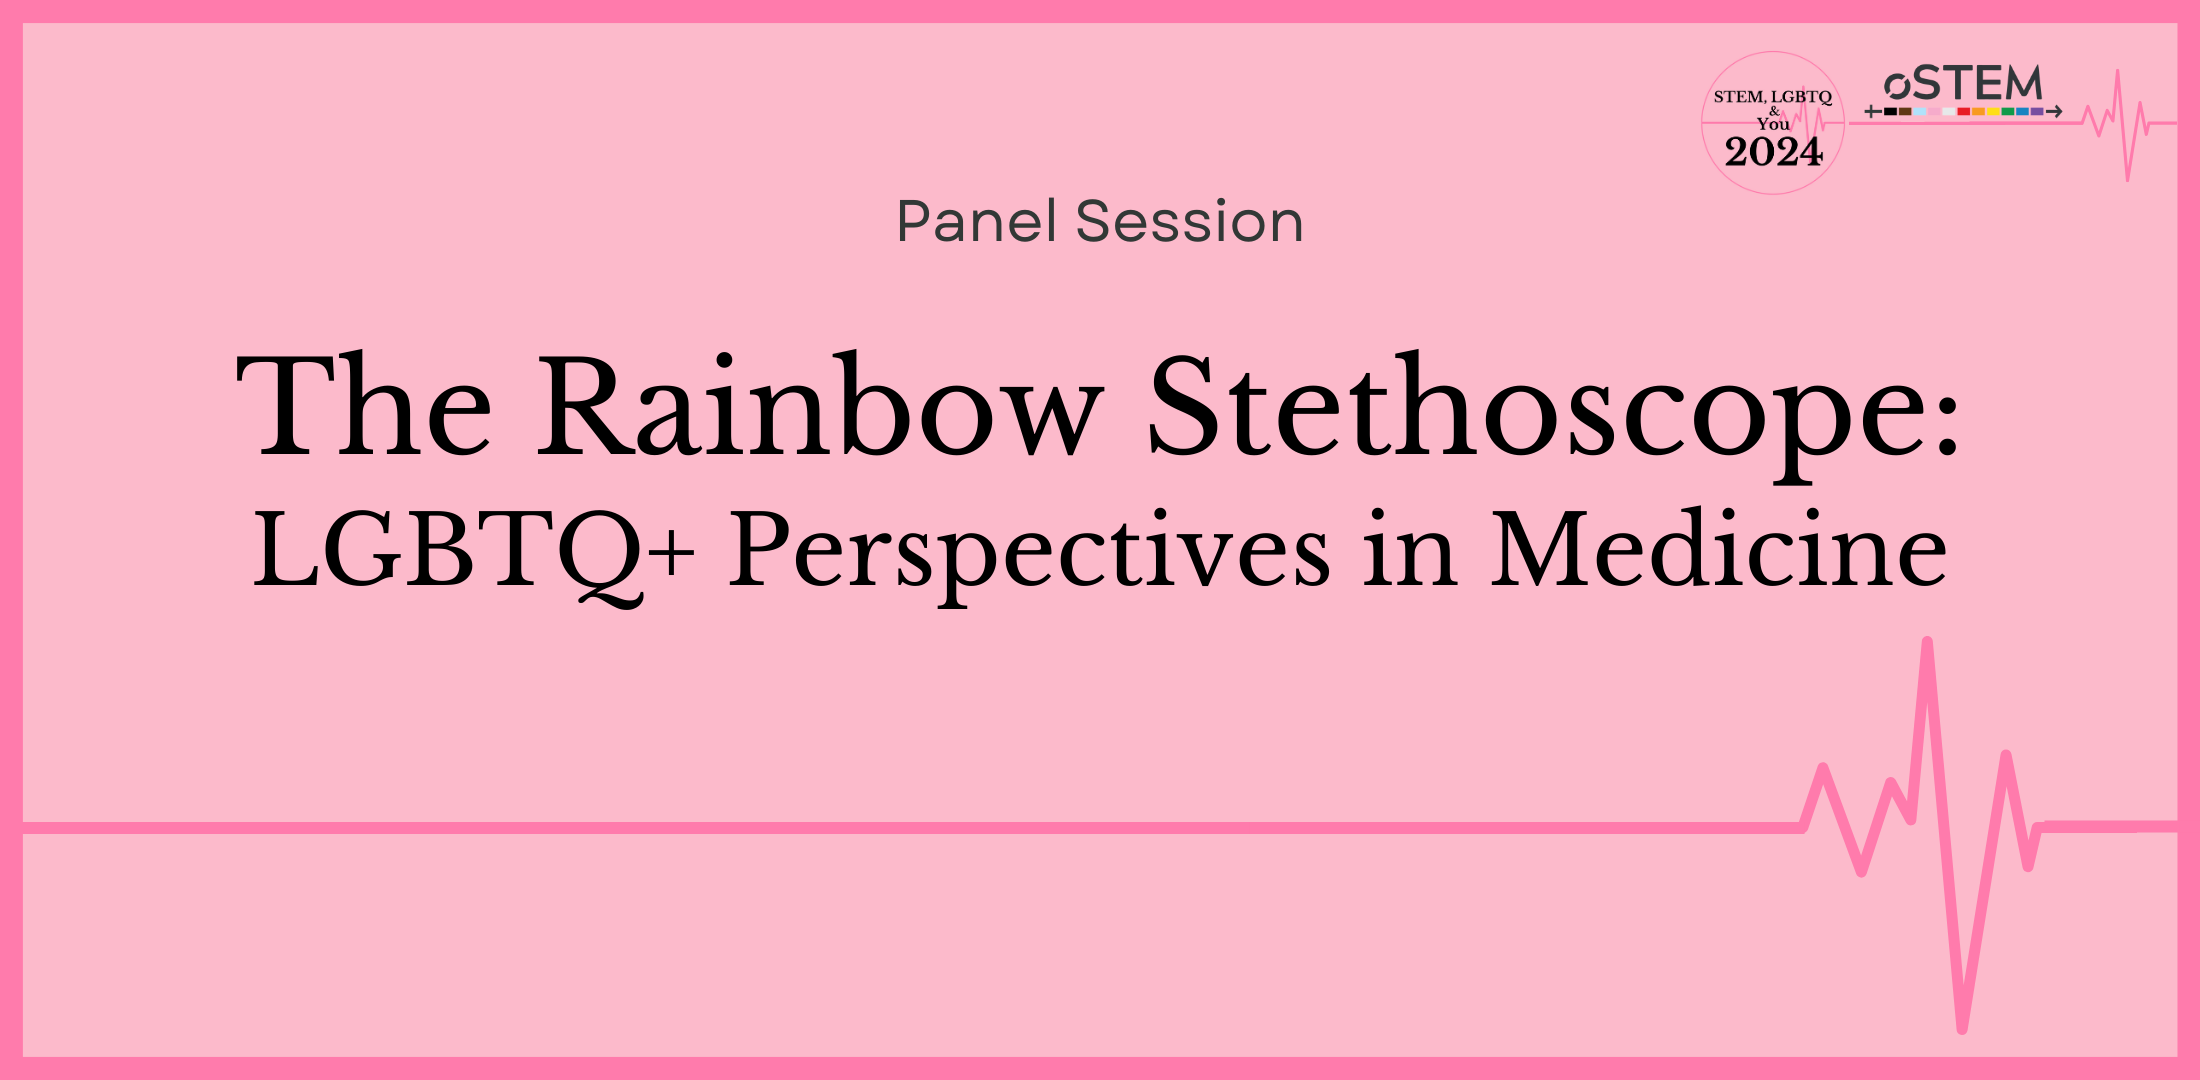 A pink background with a dark pink border. Panel session. The Rainbow Stethoscope: LGBTQ+ Perspectives in Medicine. The logos for STEM, LGBTQ & You 2024 and oSTEM Inc are in the top right corner.